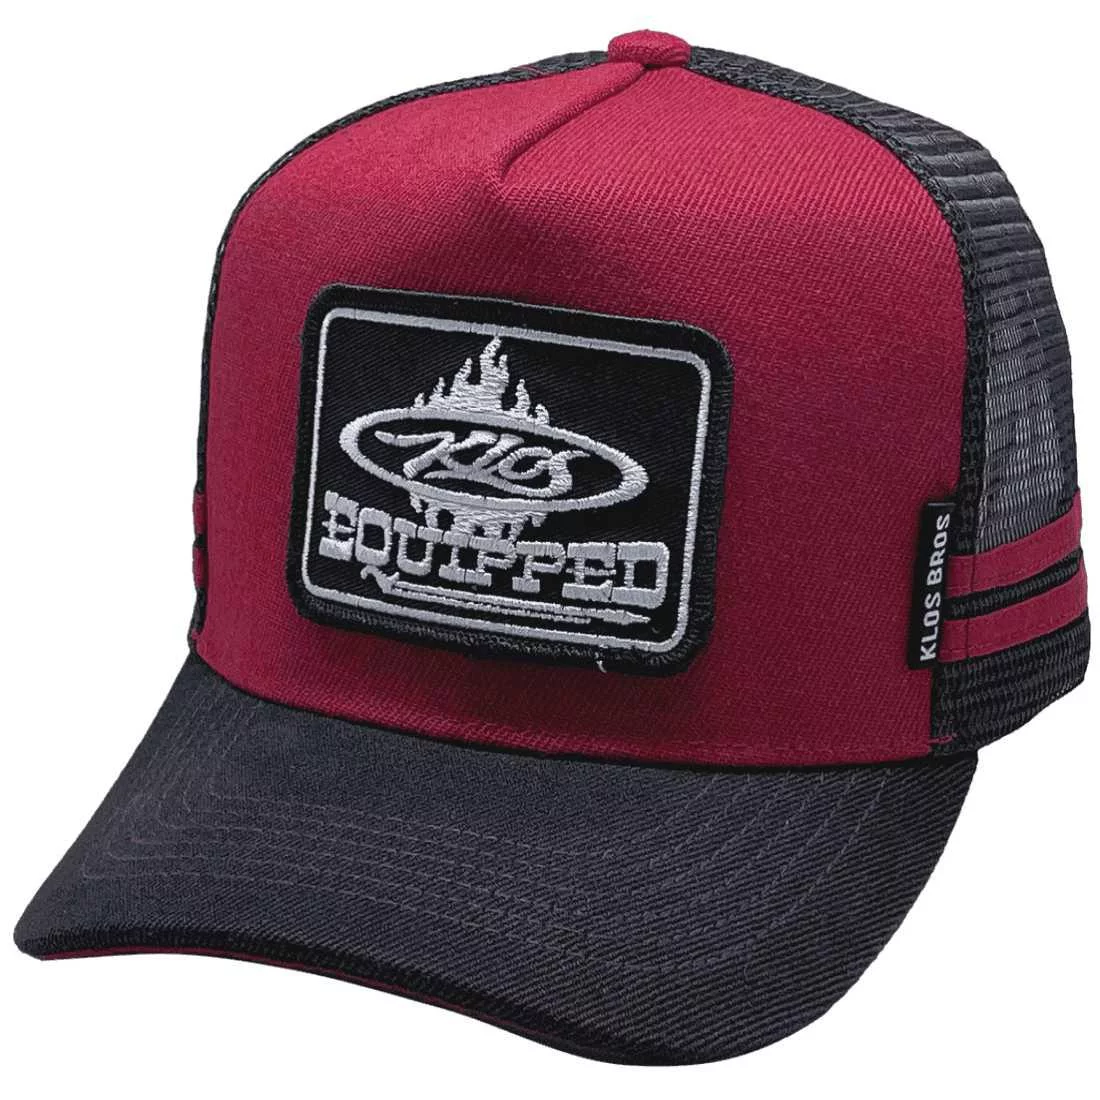 Klos Equipped Custom Trucks - HP Original Basic Aussie Trucker Hats with double side bands Acrylic Maroon Black